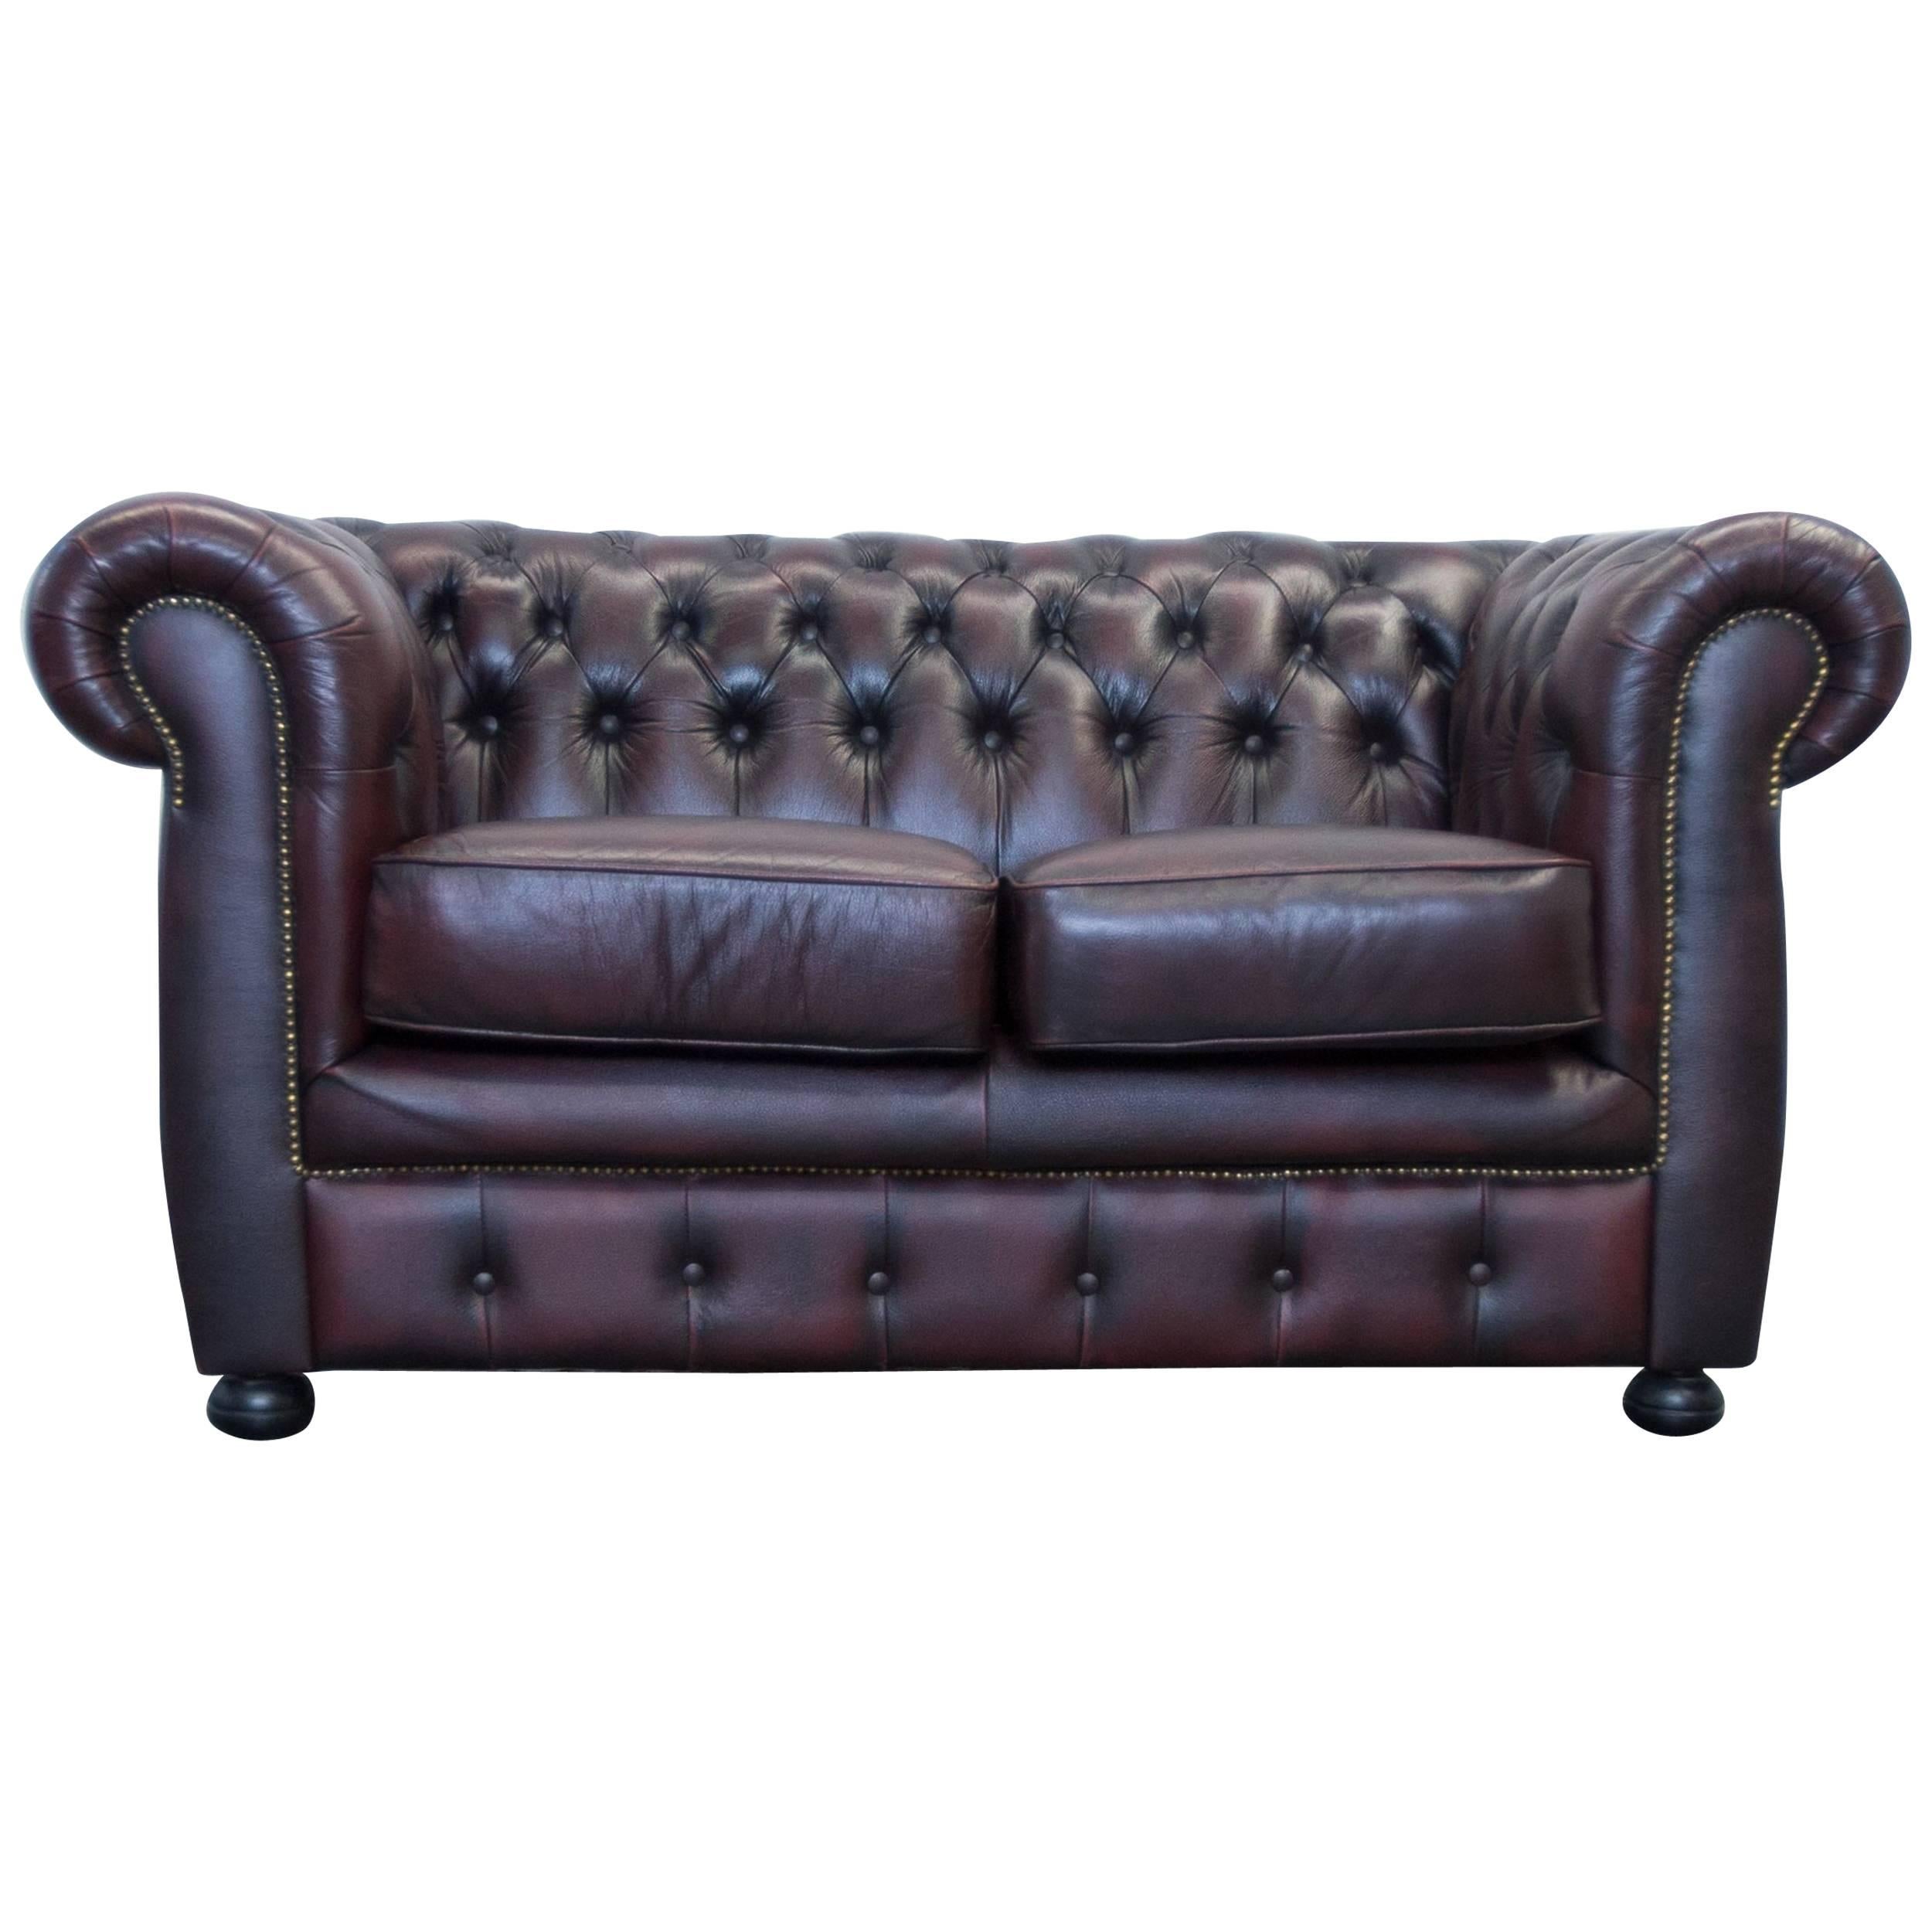 Red Leather Chesterfield Three-Seat Sofa by Möbel Art For Sale